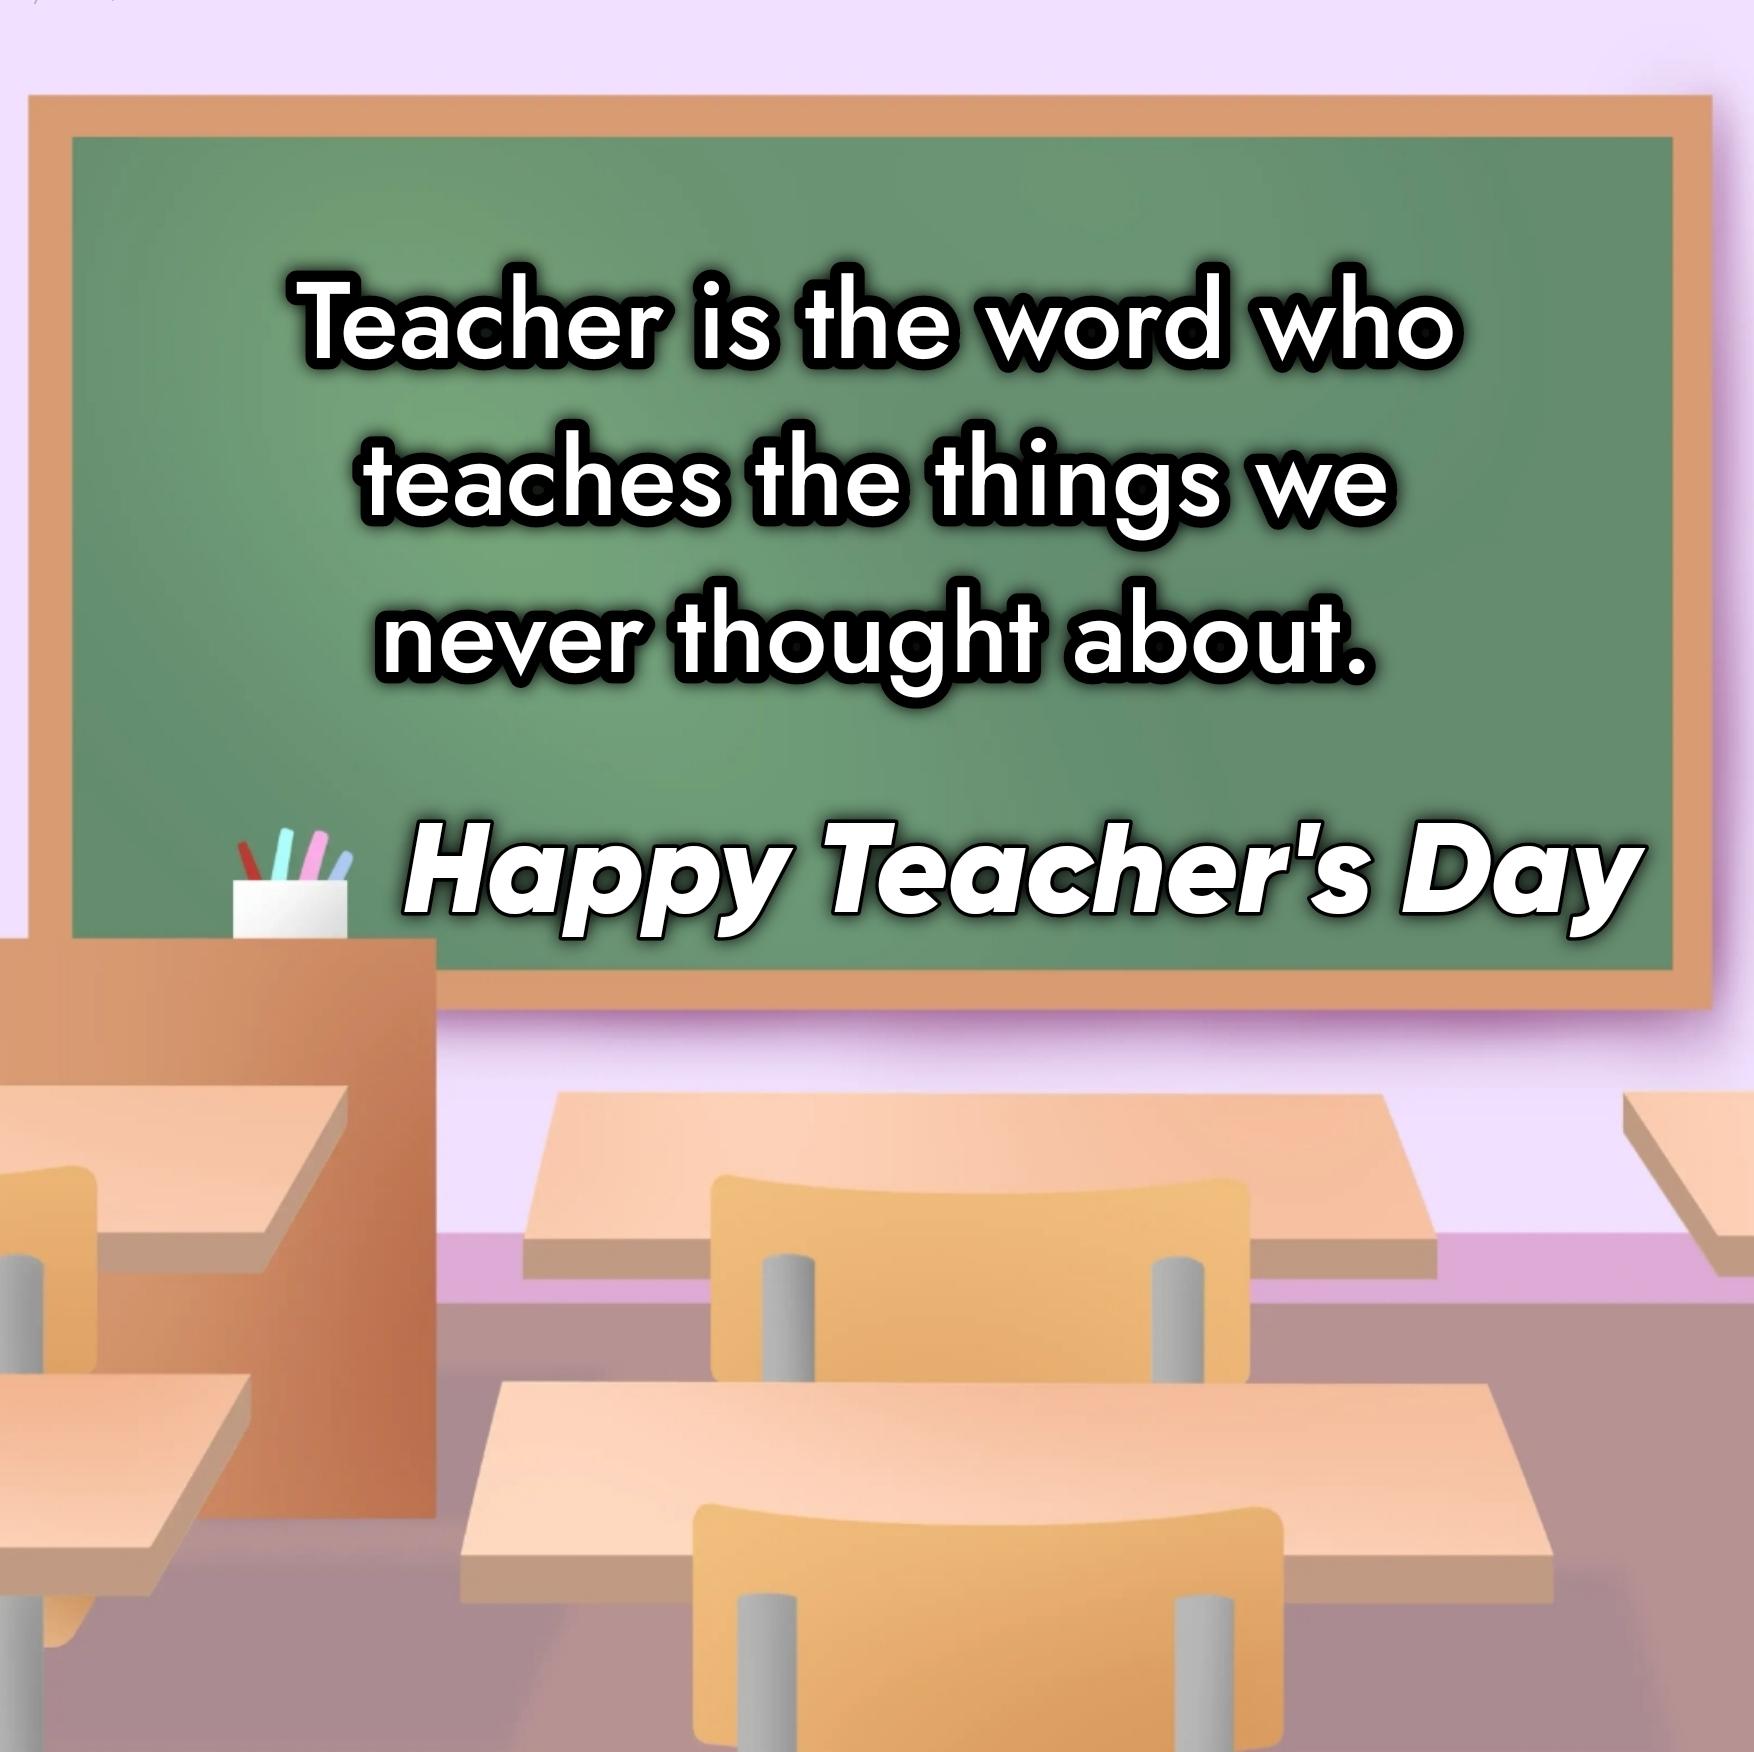 Teacher is the word who teaches the things